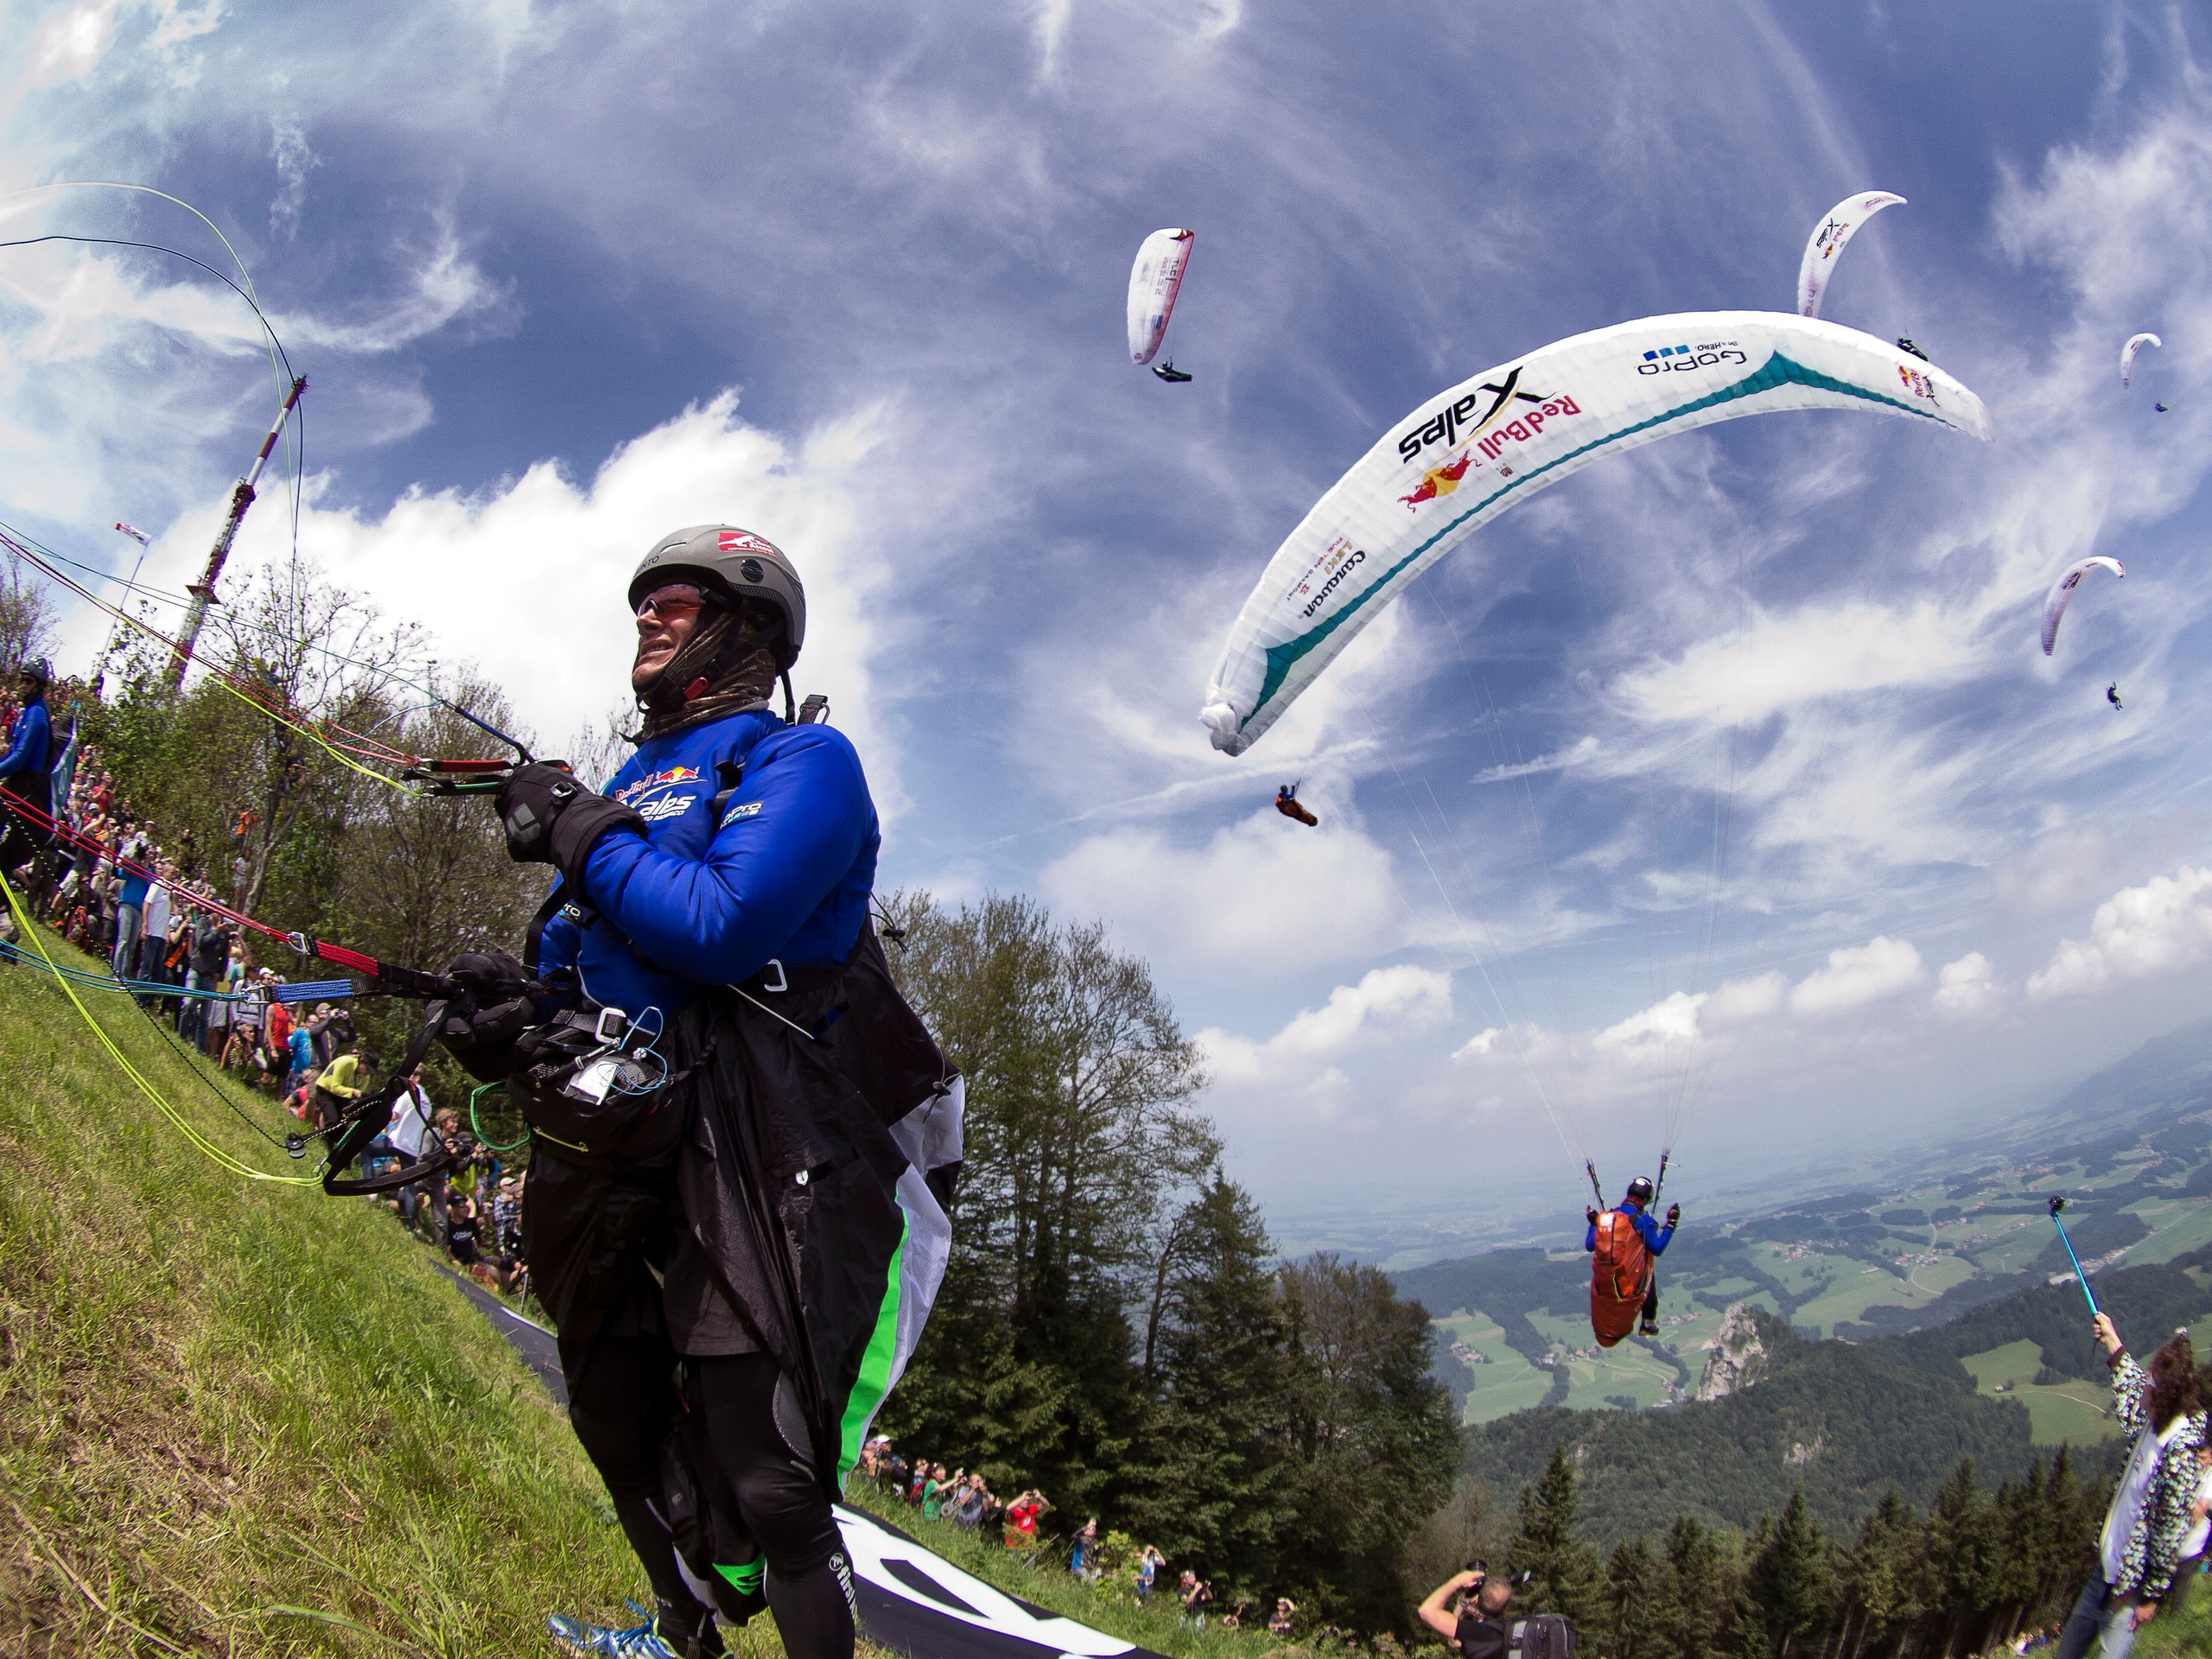 Pierre Carter (RSA) prepares for flyght during the Red Bull X-Alps 2013 at Gaisberg in Austria on July 7th, 2013